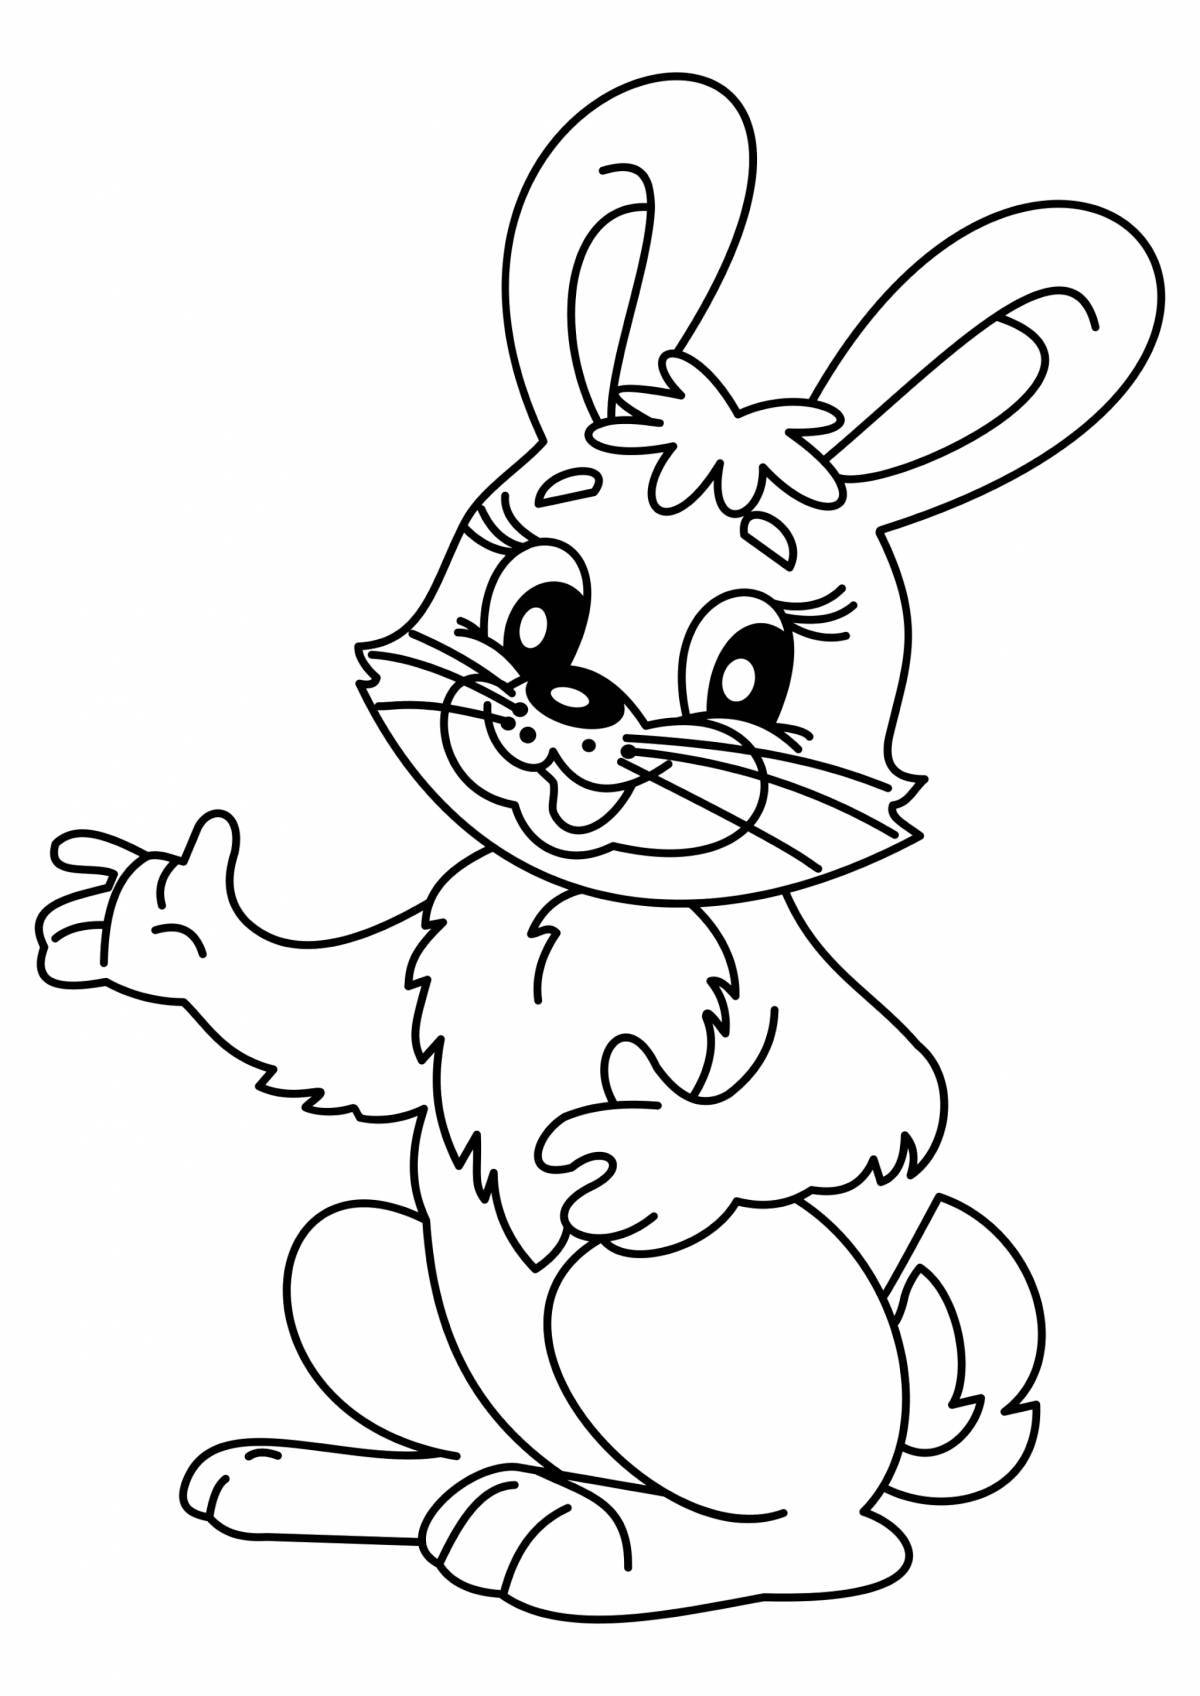 Bright coloring page bunny picture